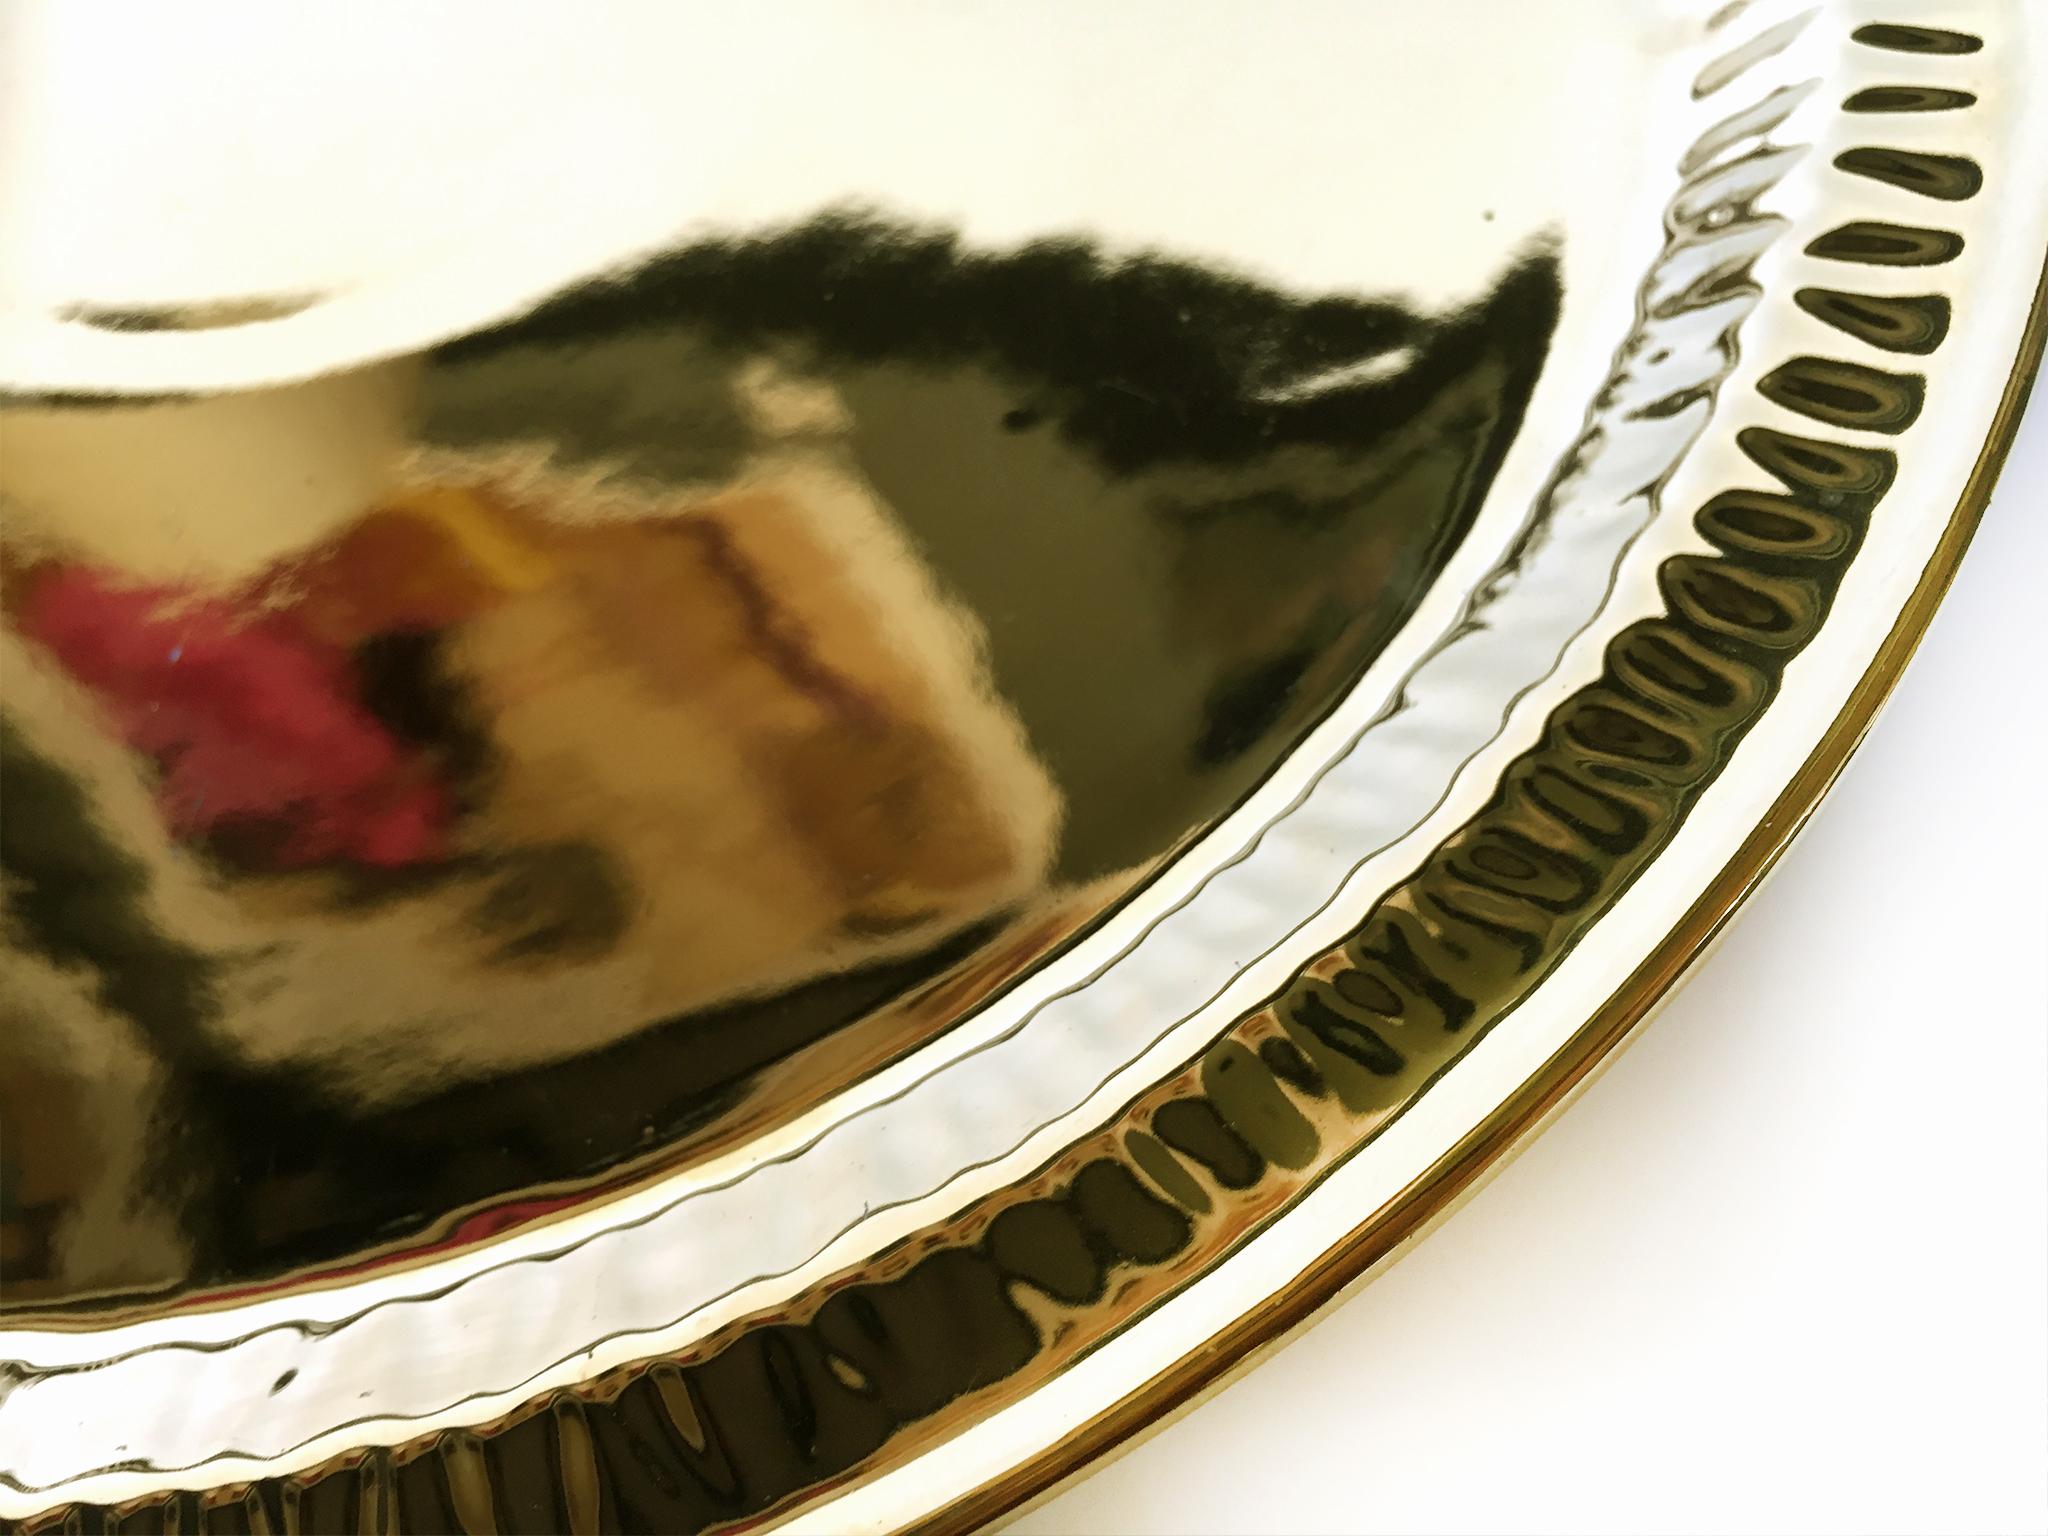 Contemporary Seletti Gold Porcelain Plates Estetico Quotidiano Collection, a Set of 8